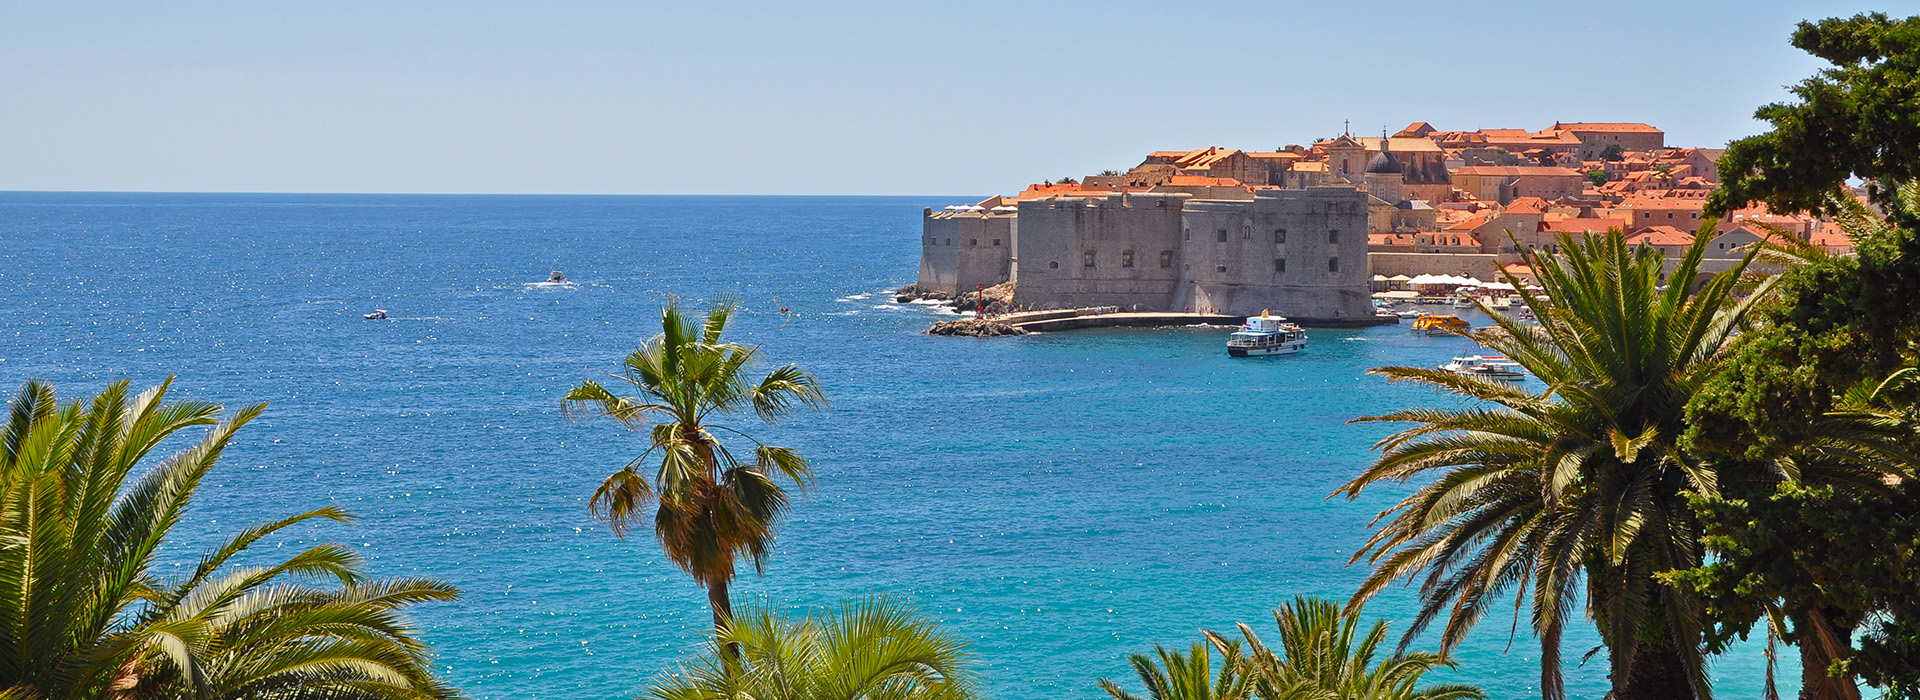 Montenegro and Croatia Self-Guided Walking Holiday - Dubrovnik old town